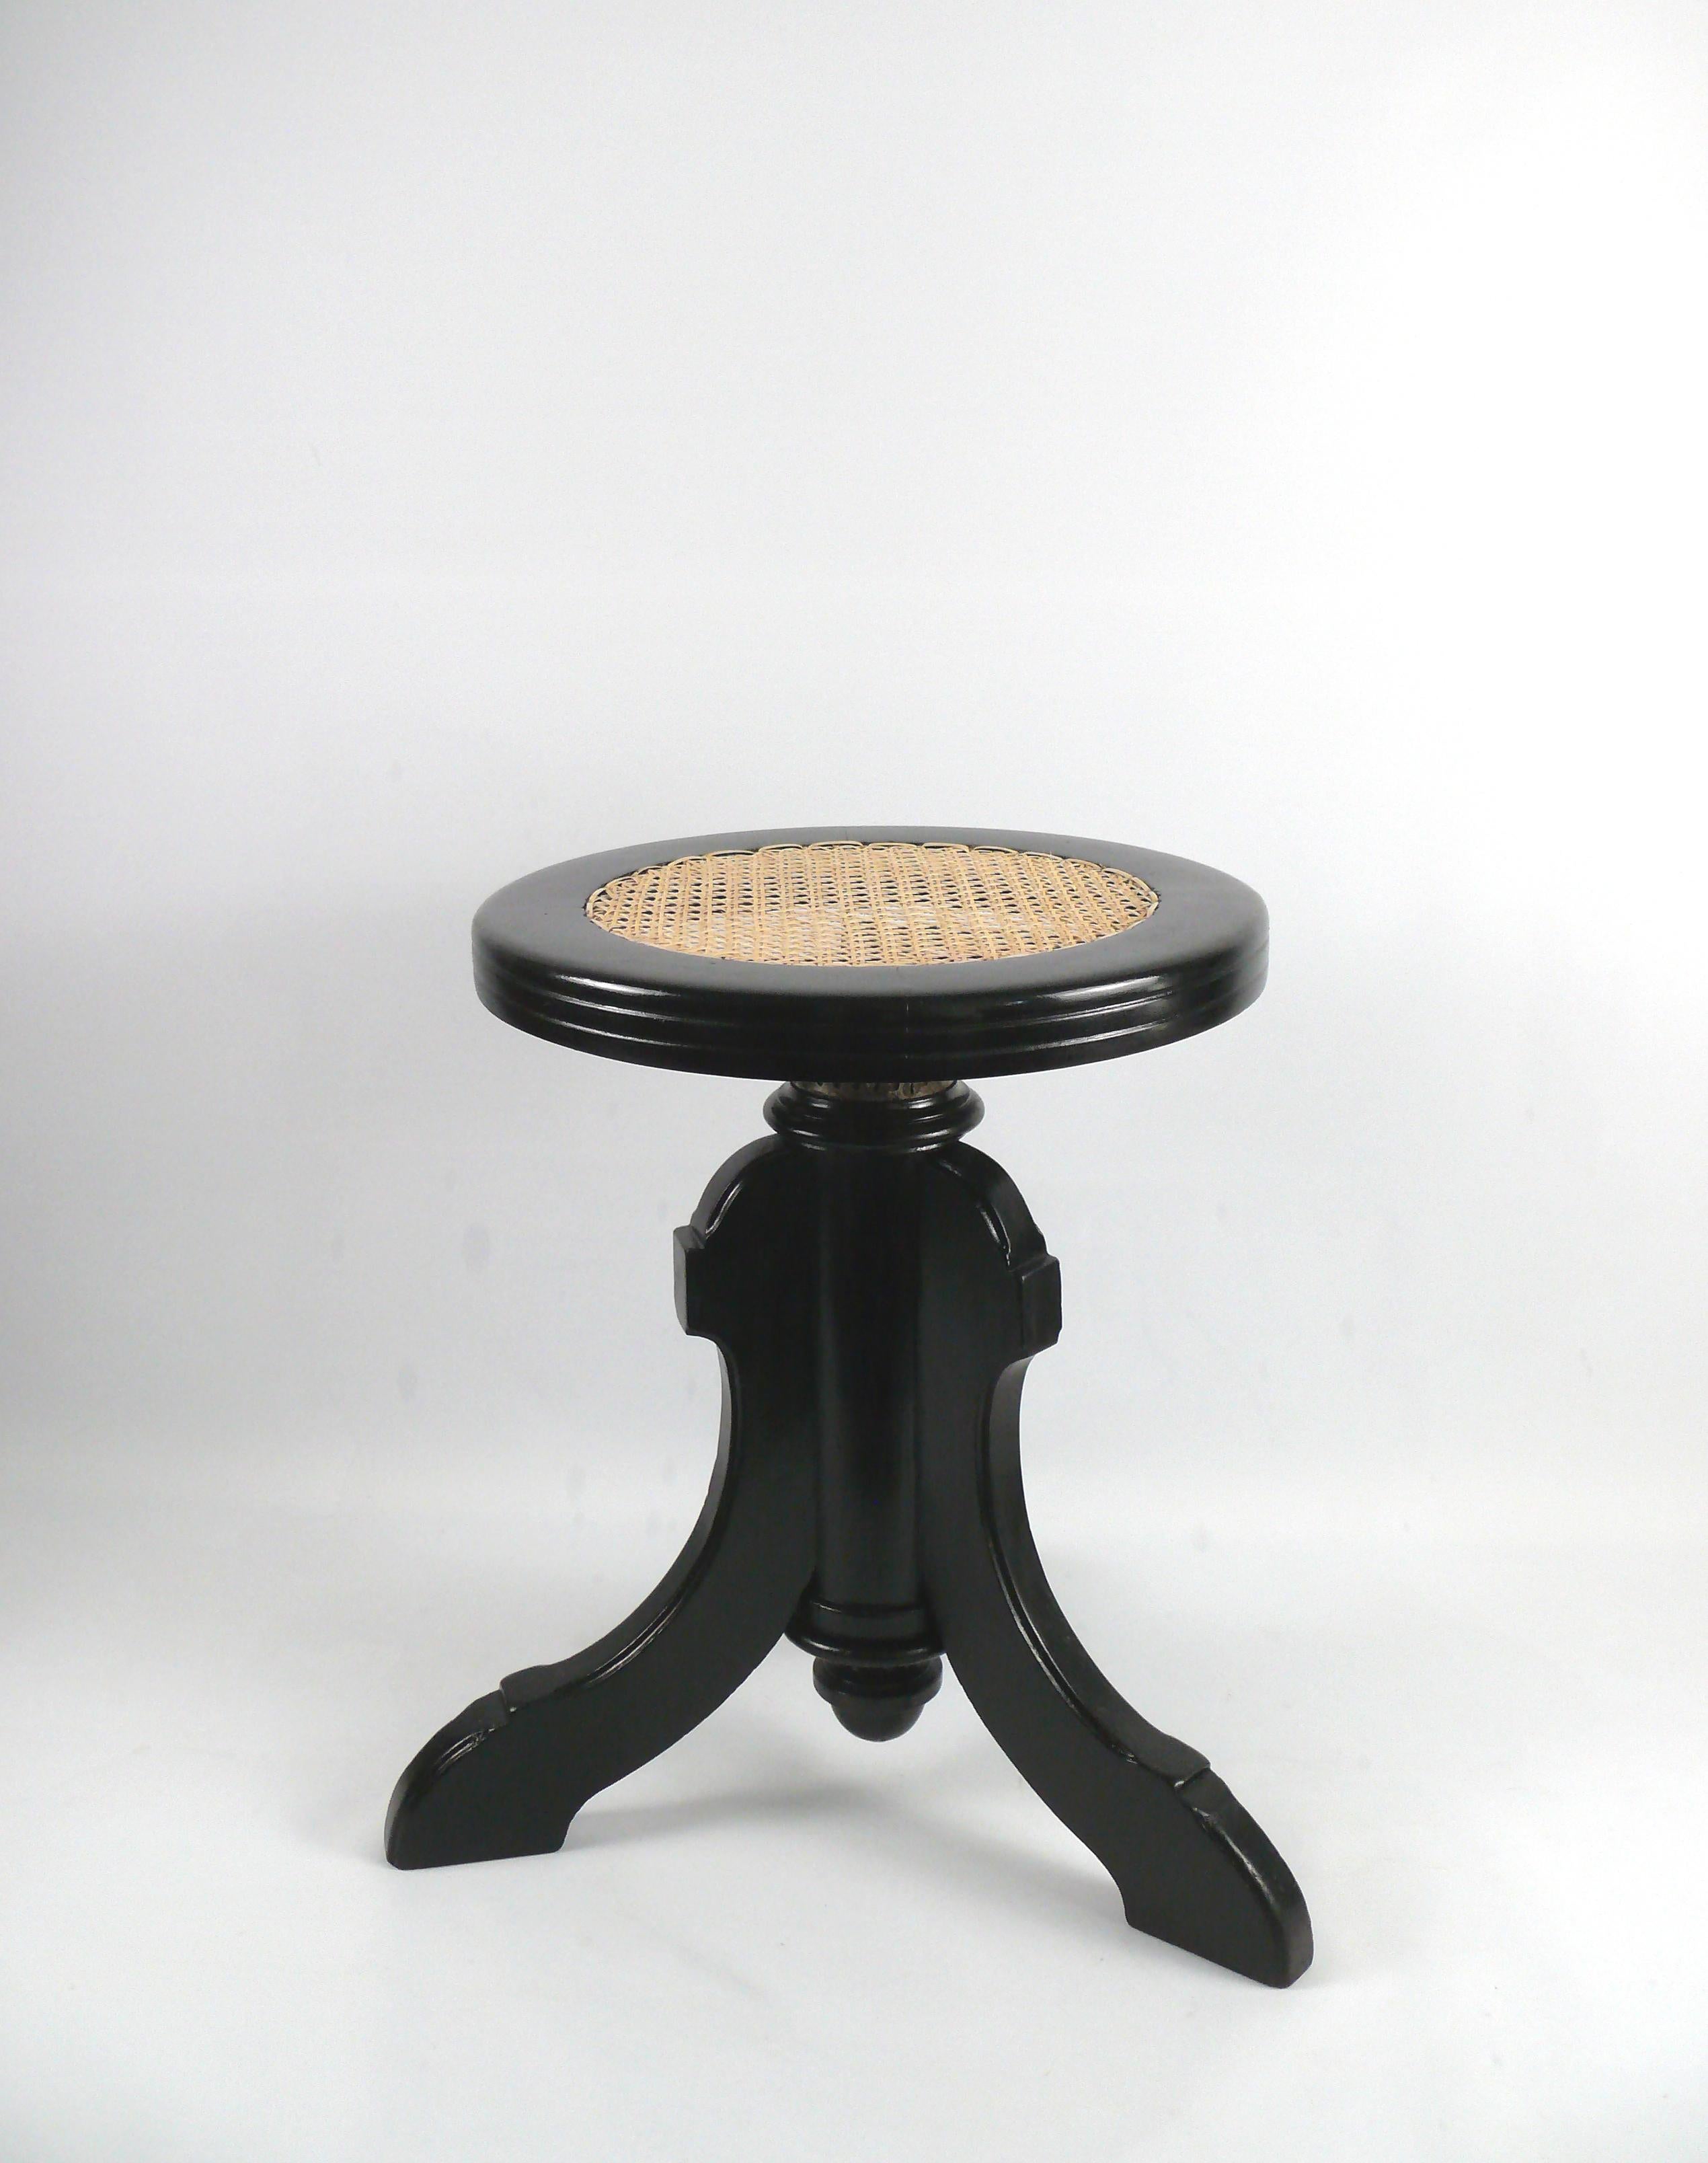 Very solid piano stool/swivel stool with seat made of hand-woven Viennese cane. The piano stool is made of beech wood and has three curved feet that are connected to the central column. The stool can be adjusted in height from 46 cm to approx. 58